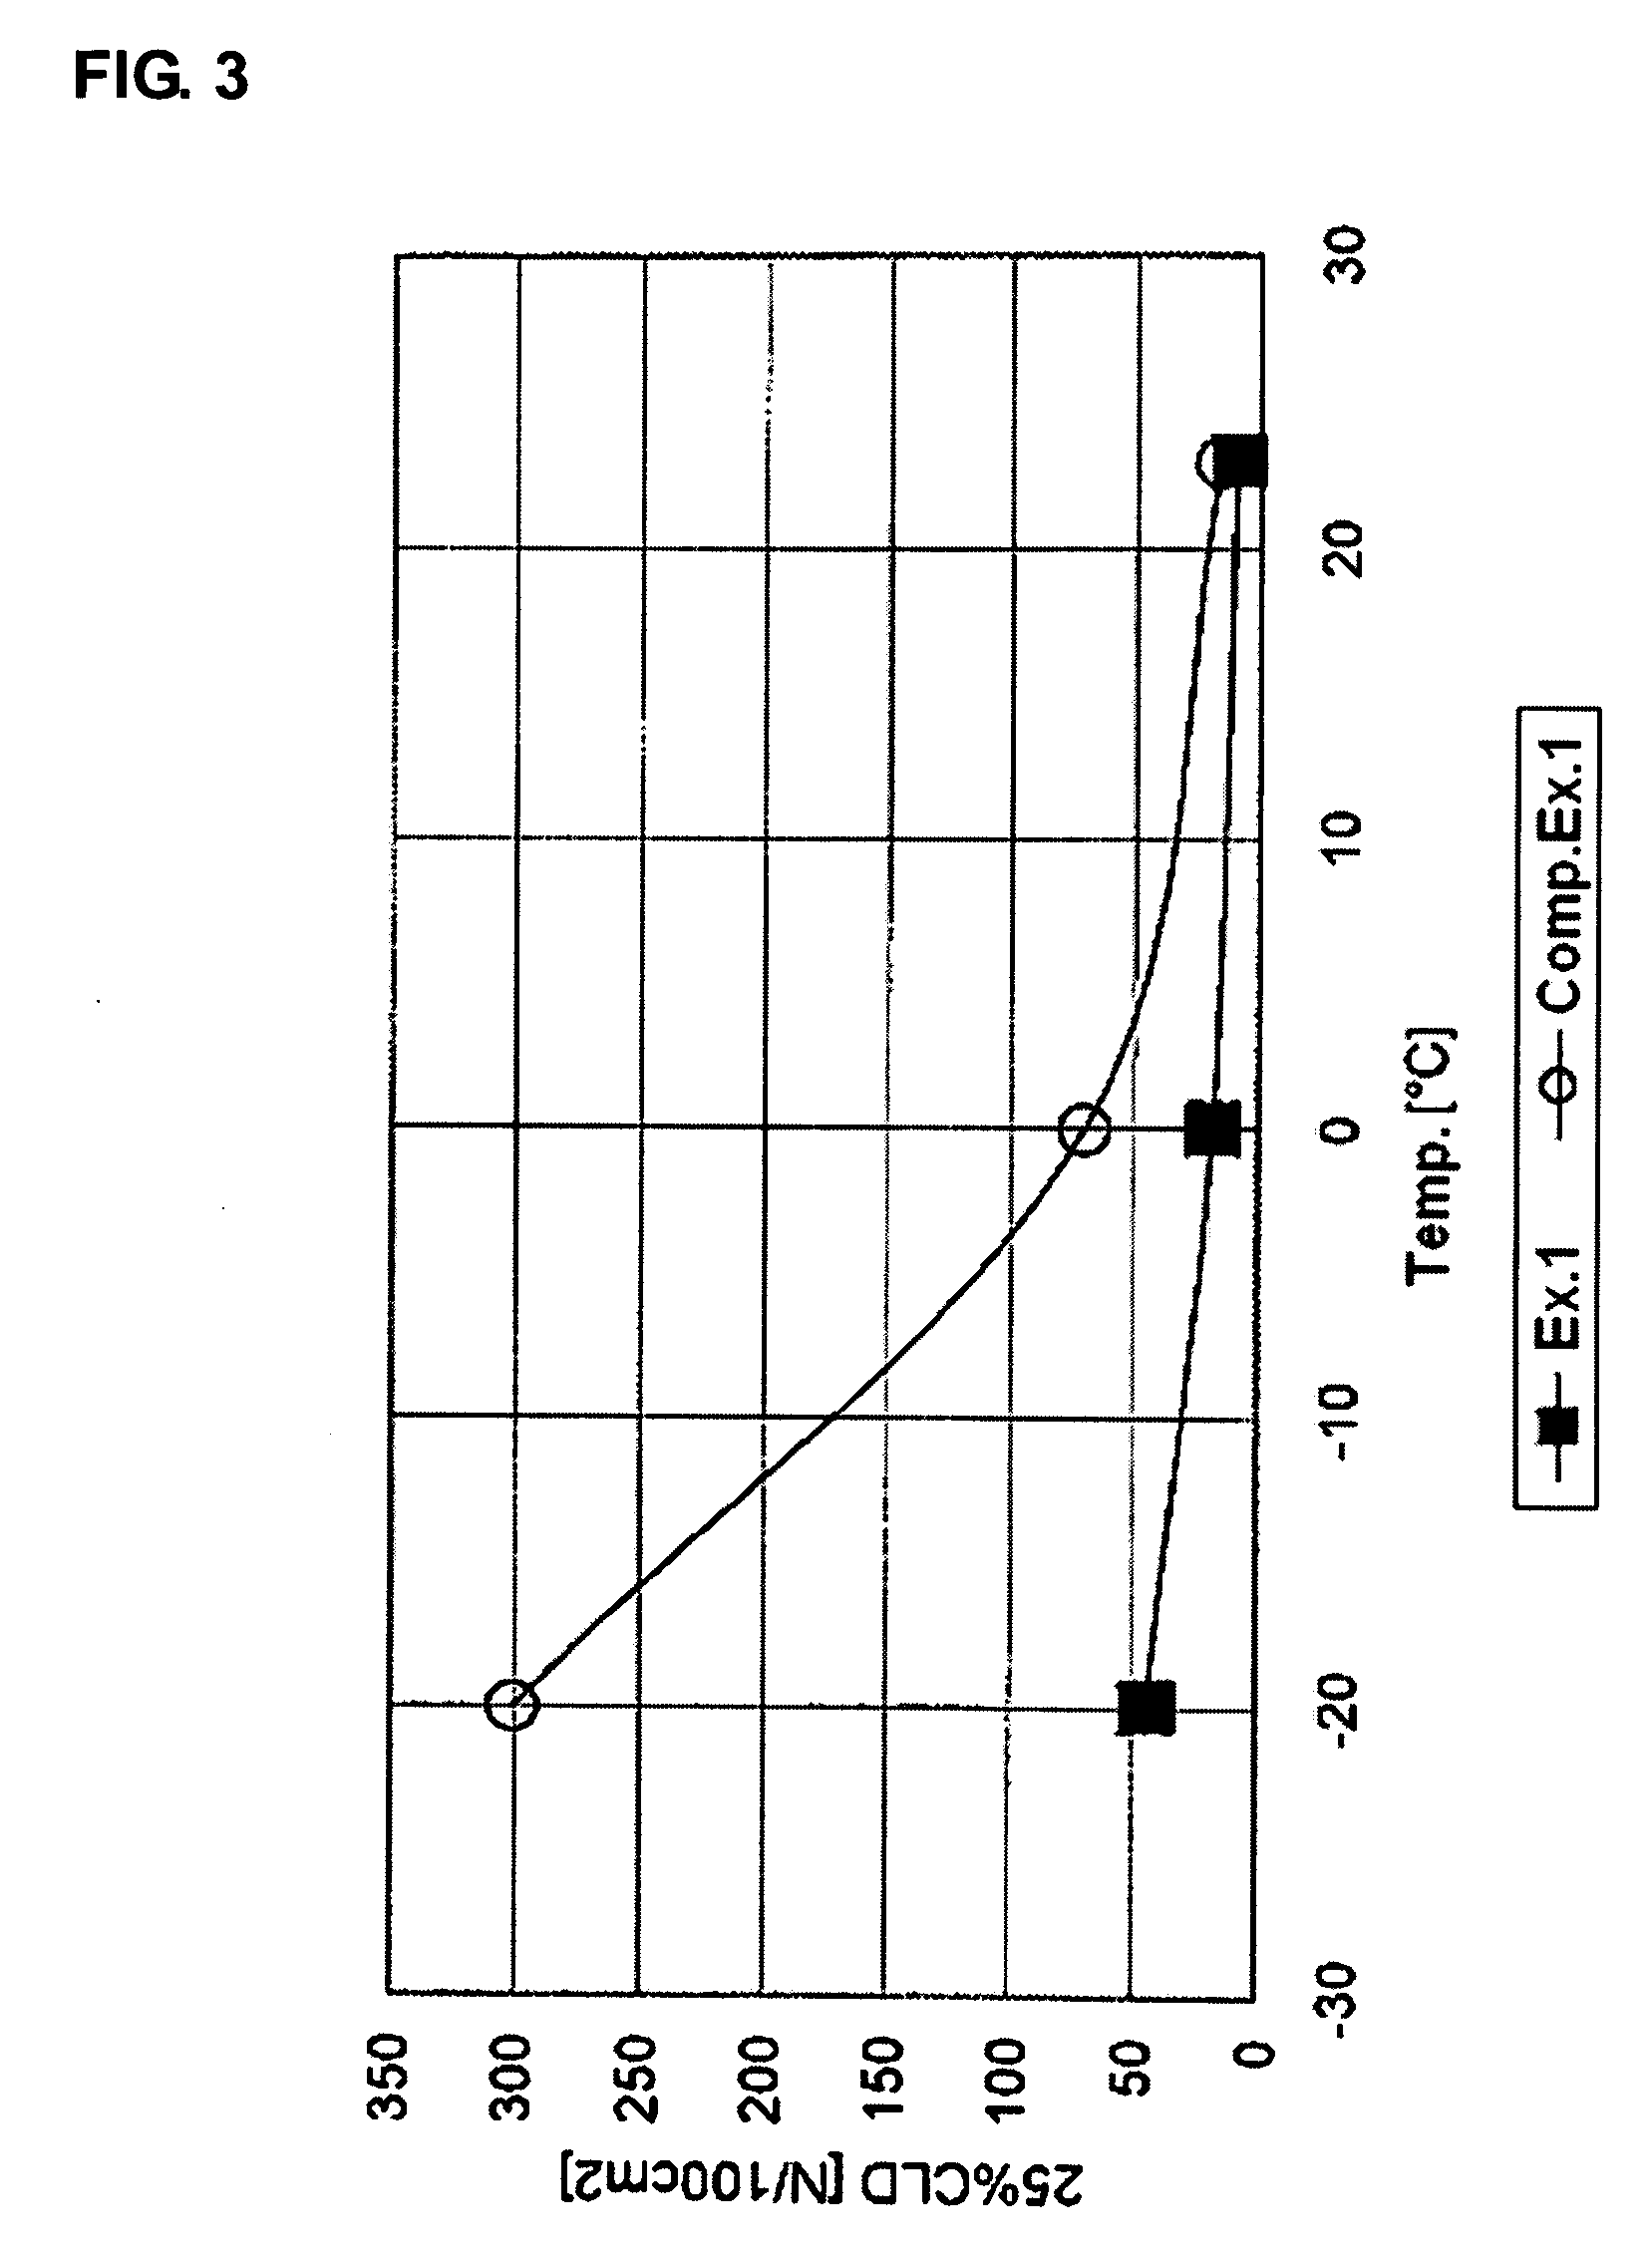 Composition for Polyurethane Foam, Polyurethane Foam Obtained From the Composition, and Use Thereof